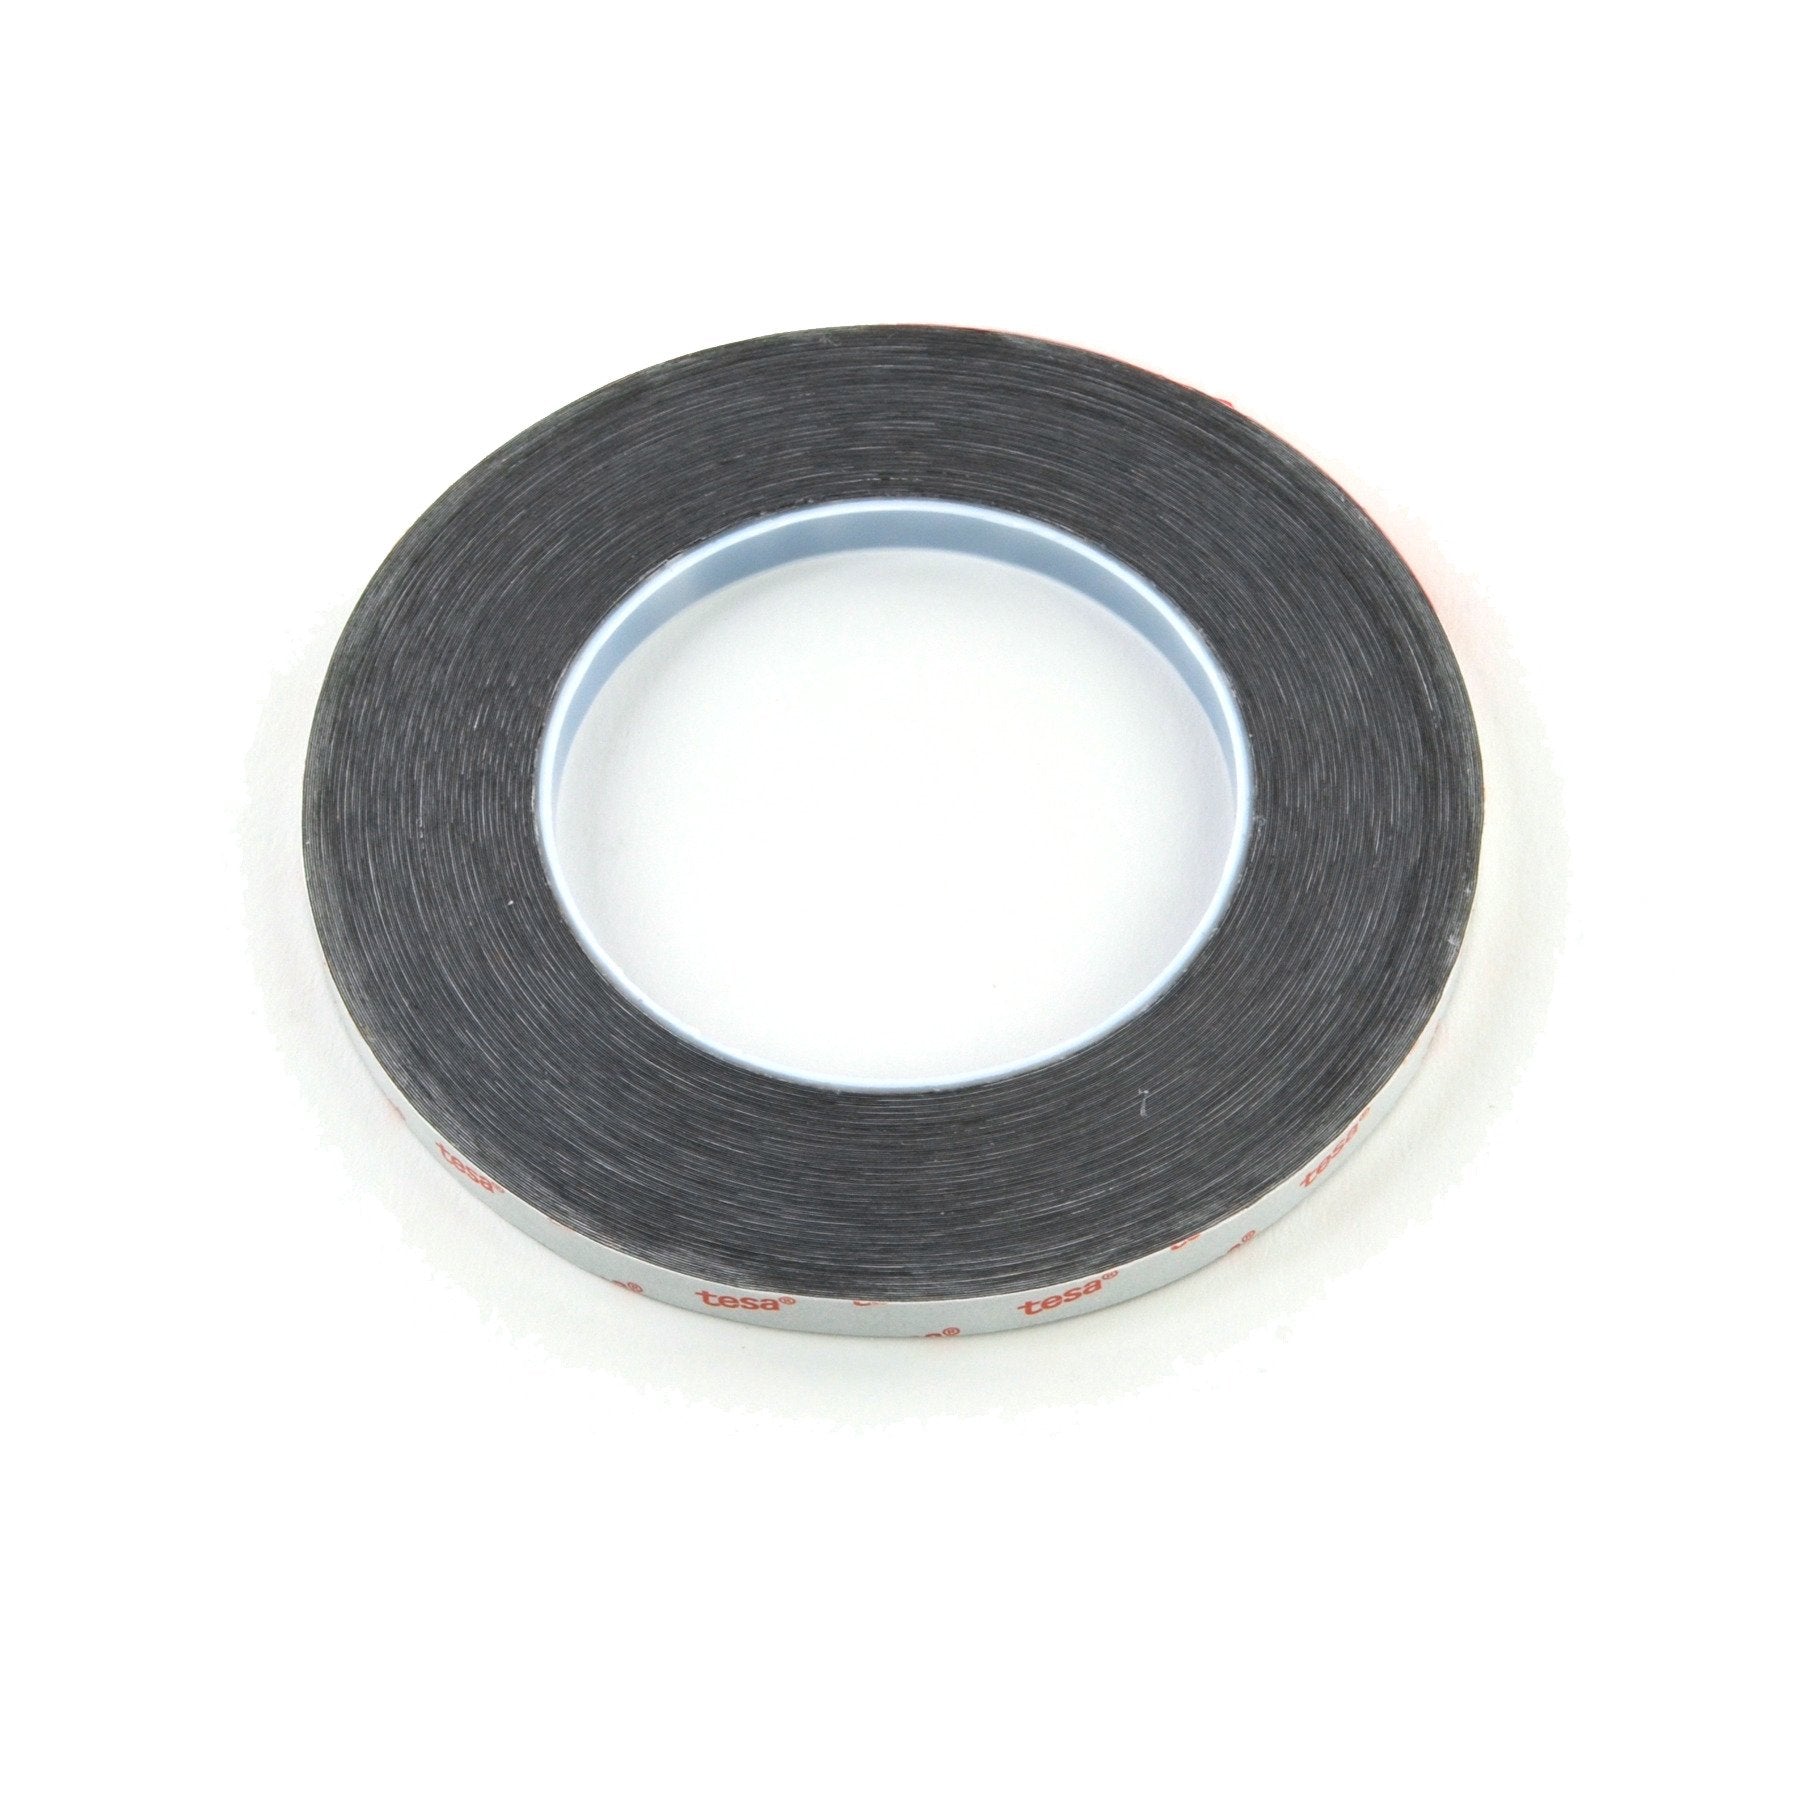 Tesa 61395 Tape New 2 mm Wide Double-Sided Roll